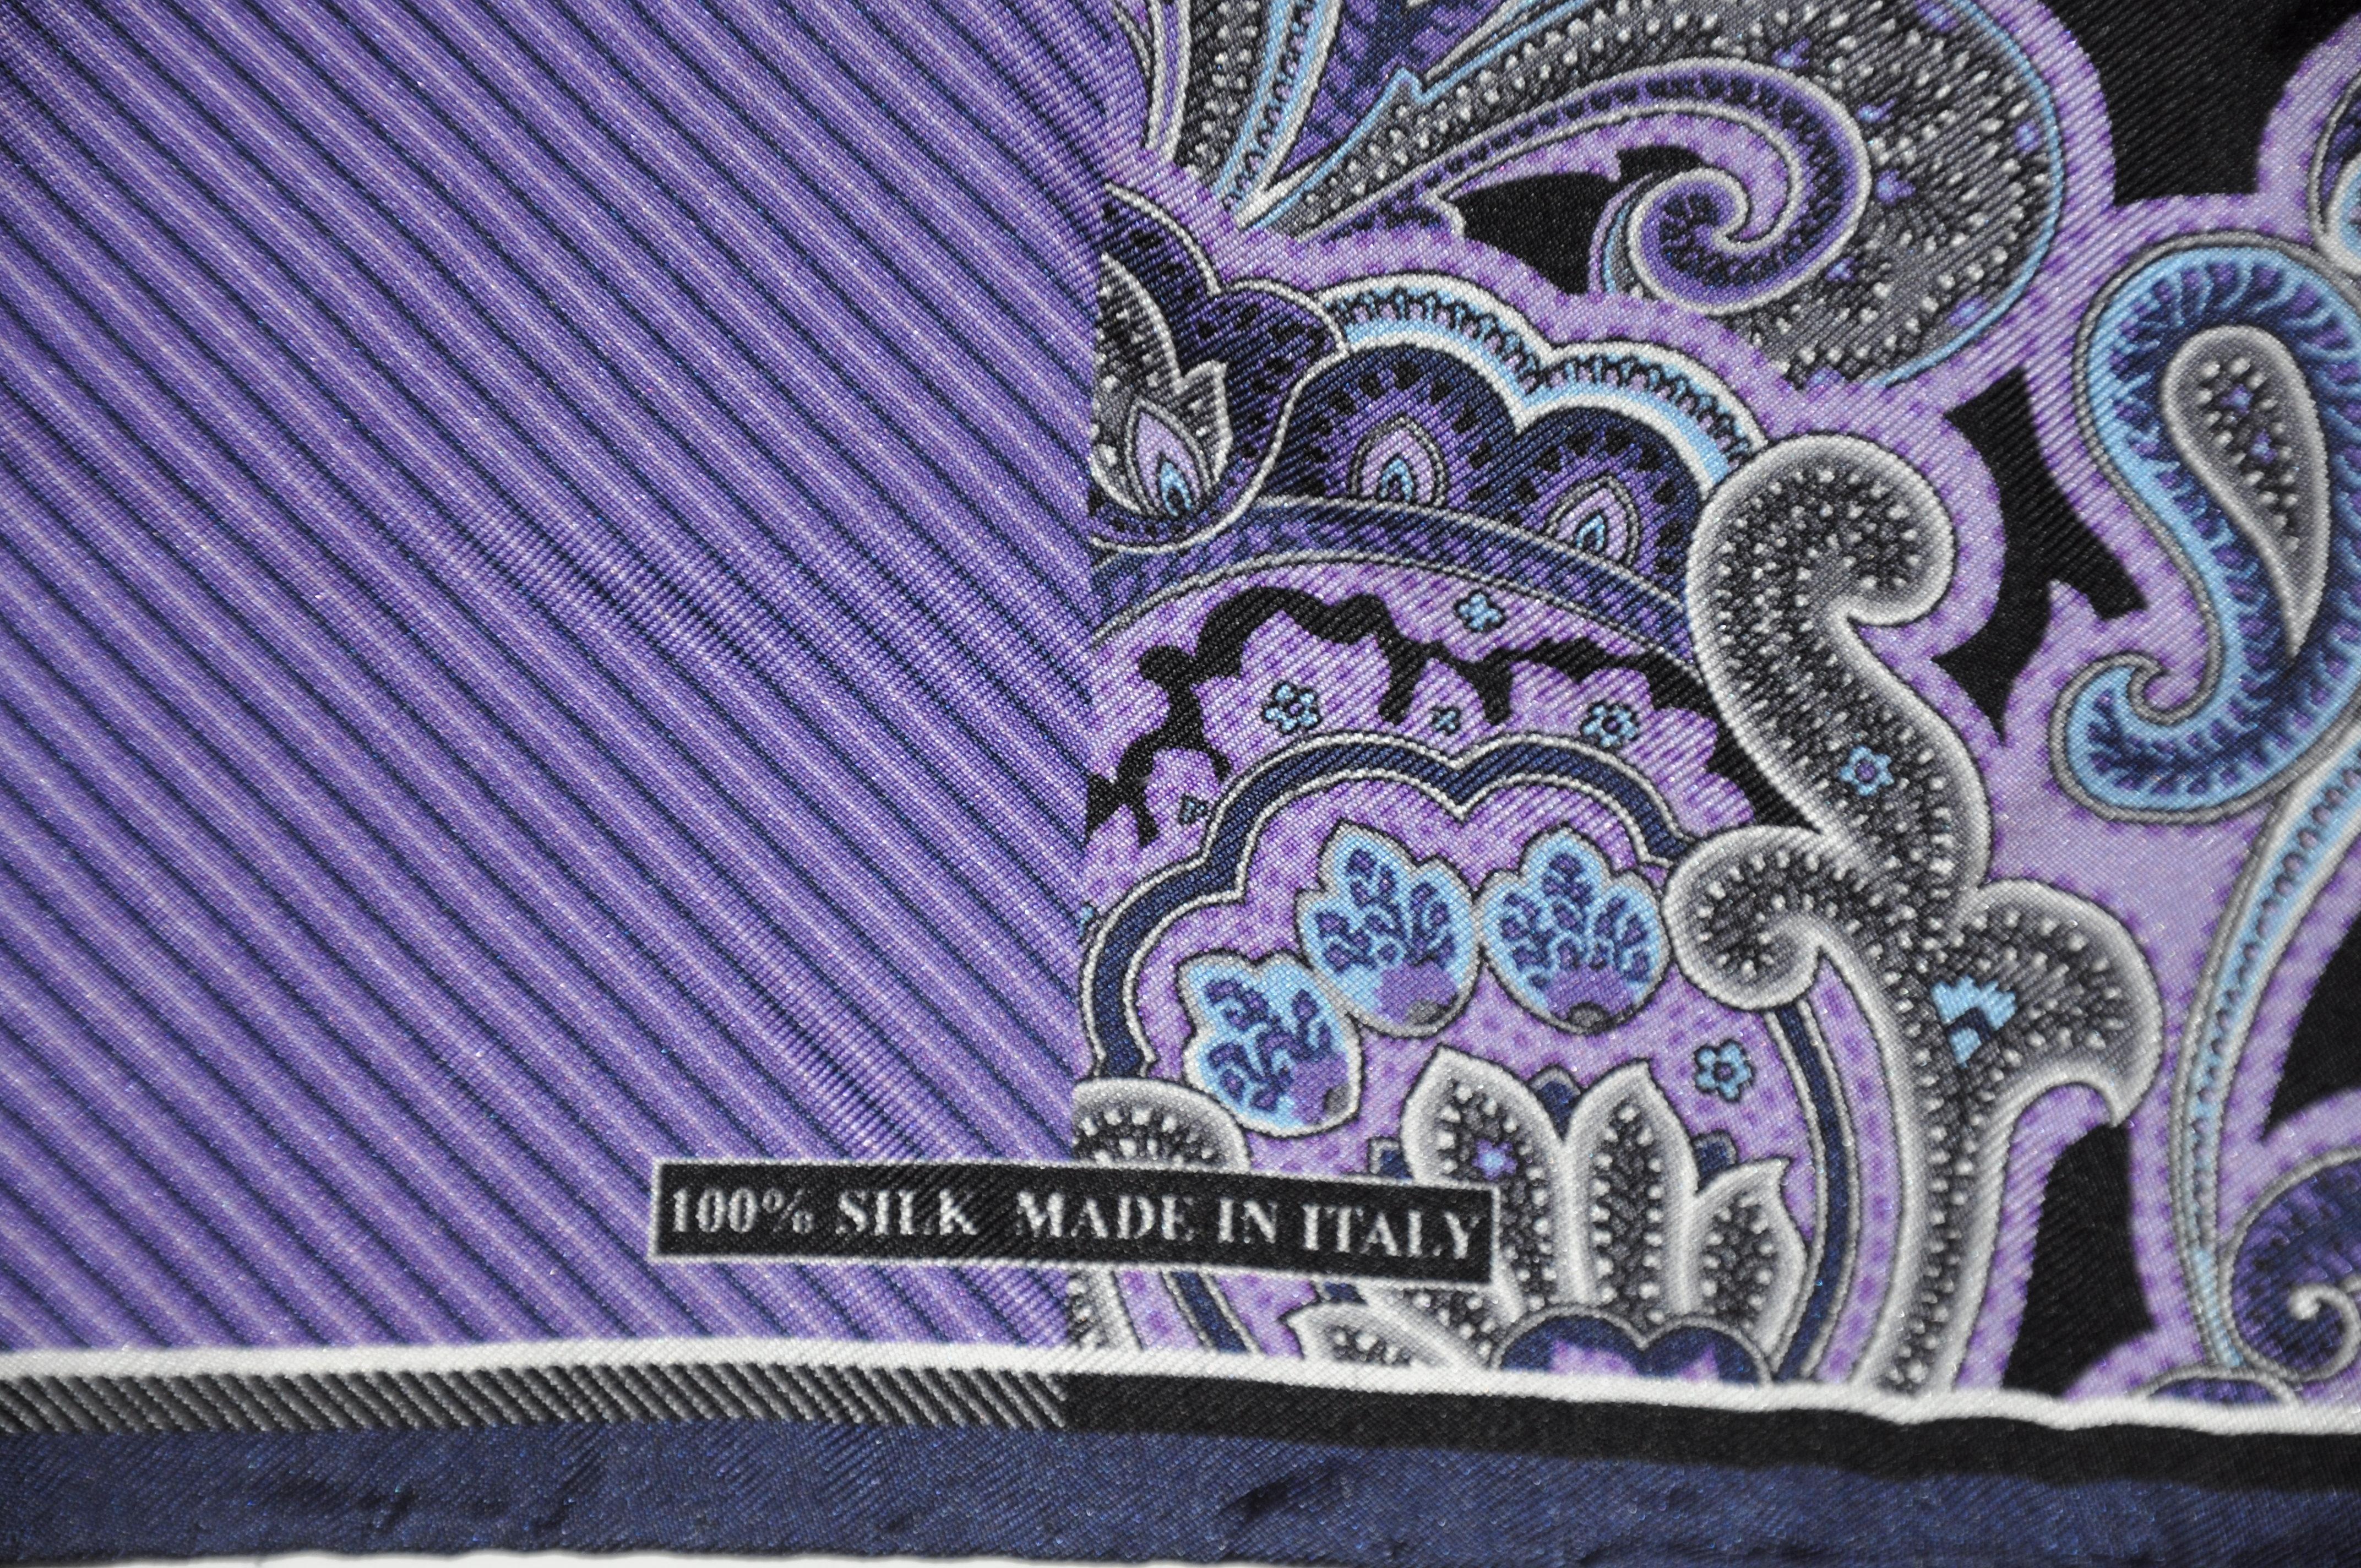 Beautifully Elegant Shades of Lavender & Violet Silk Handkerchief In Good Condition For Sale In New York, NY